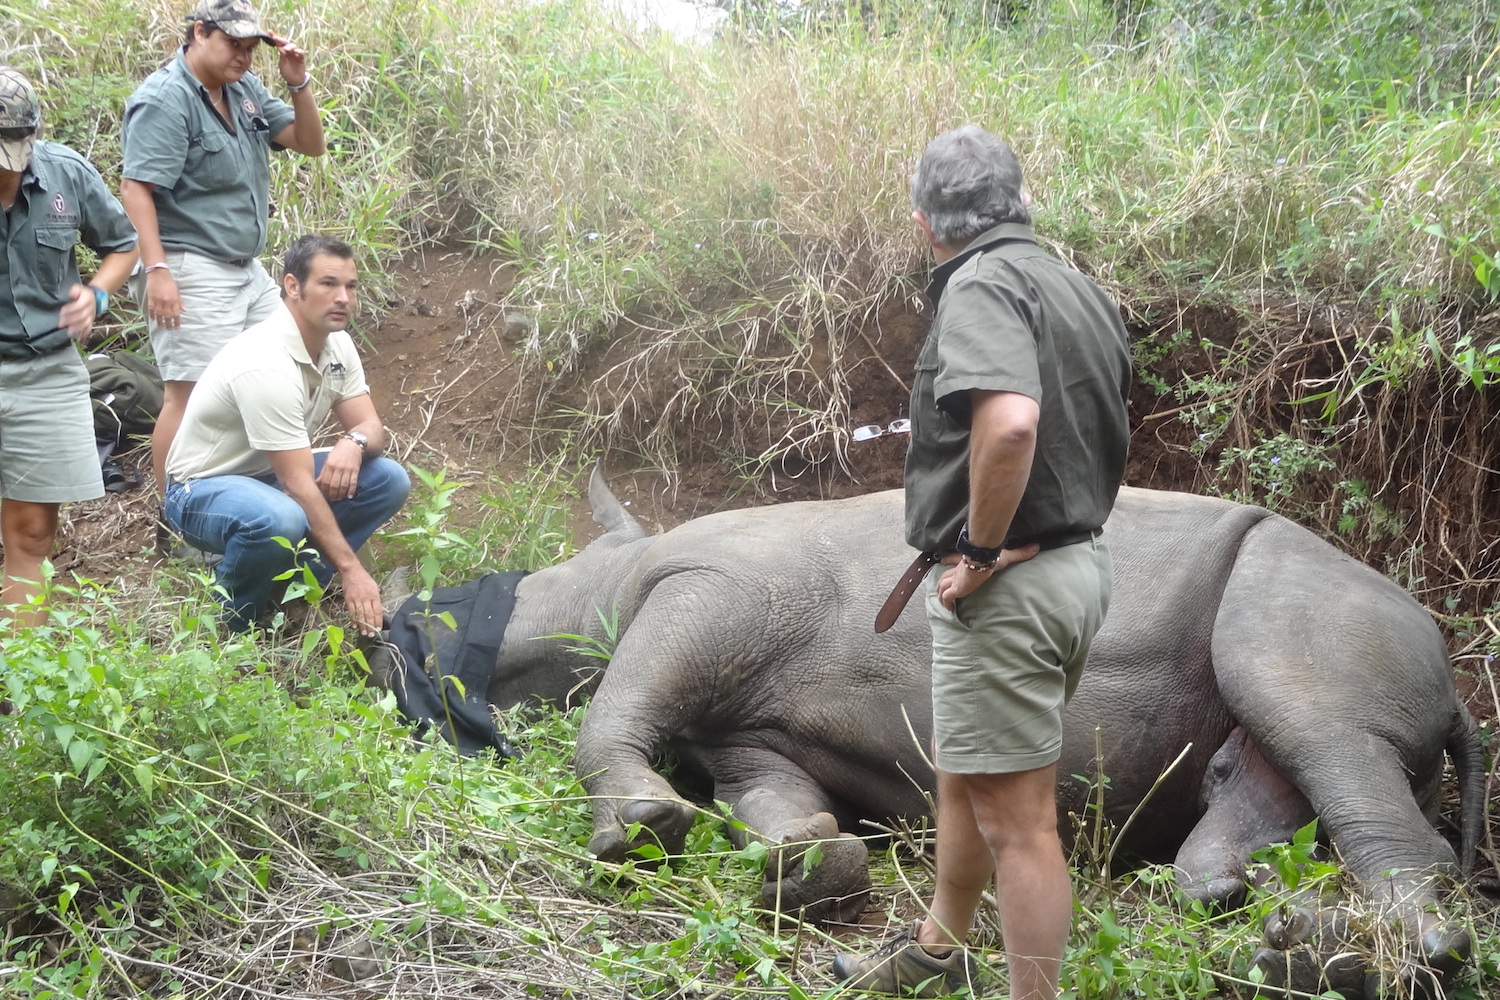 Sedated rhino, face covered, surrounded by a handful of people.